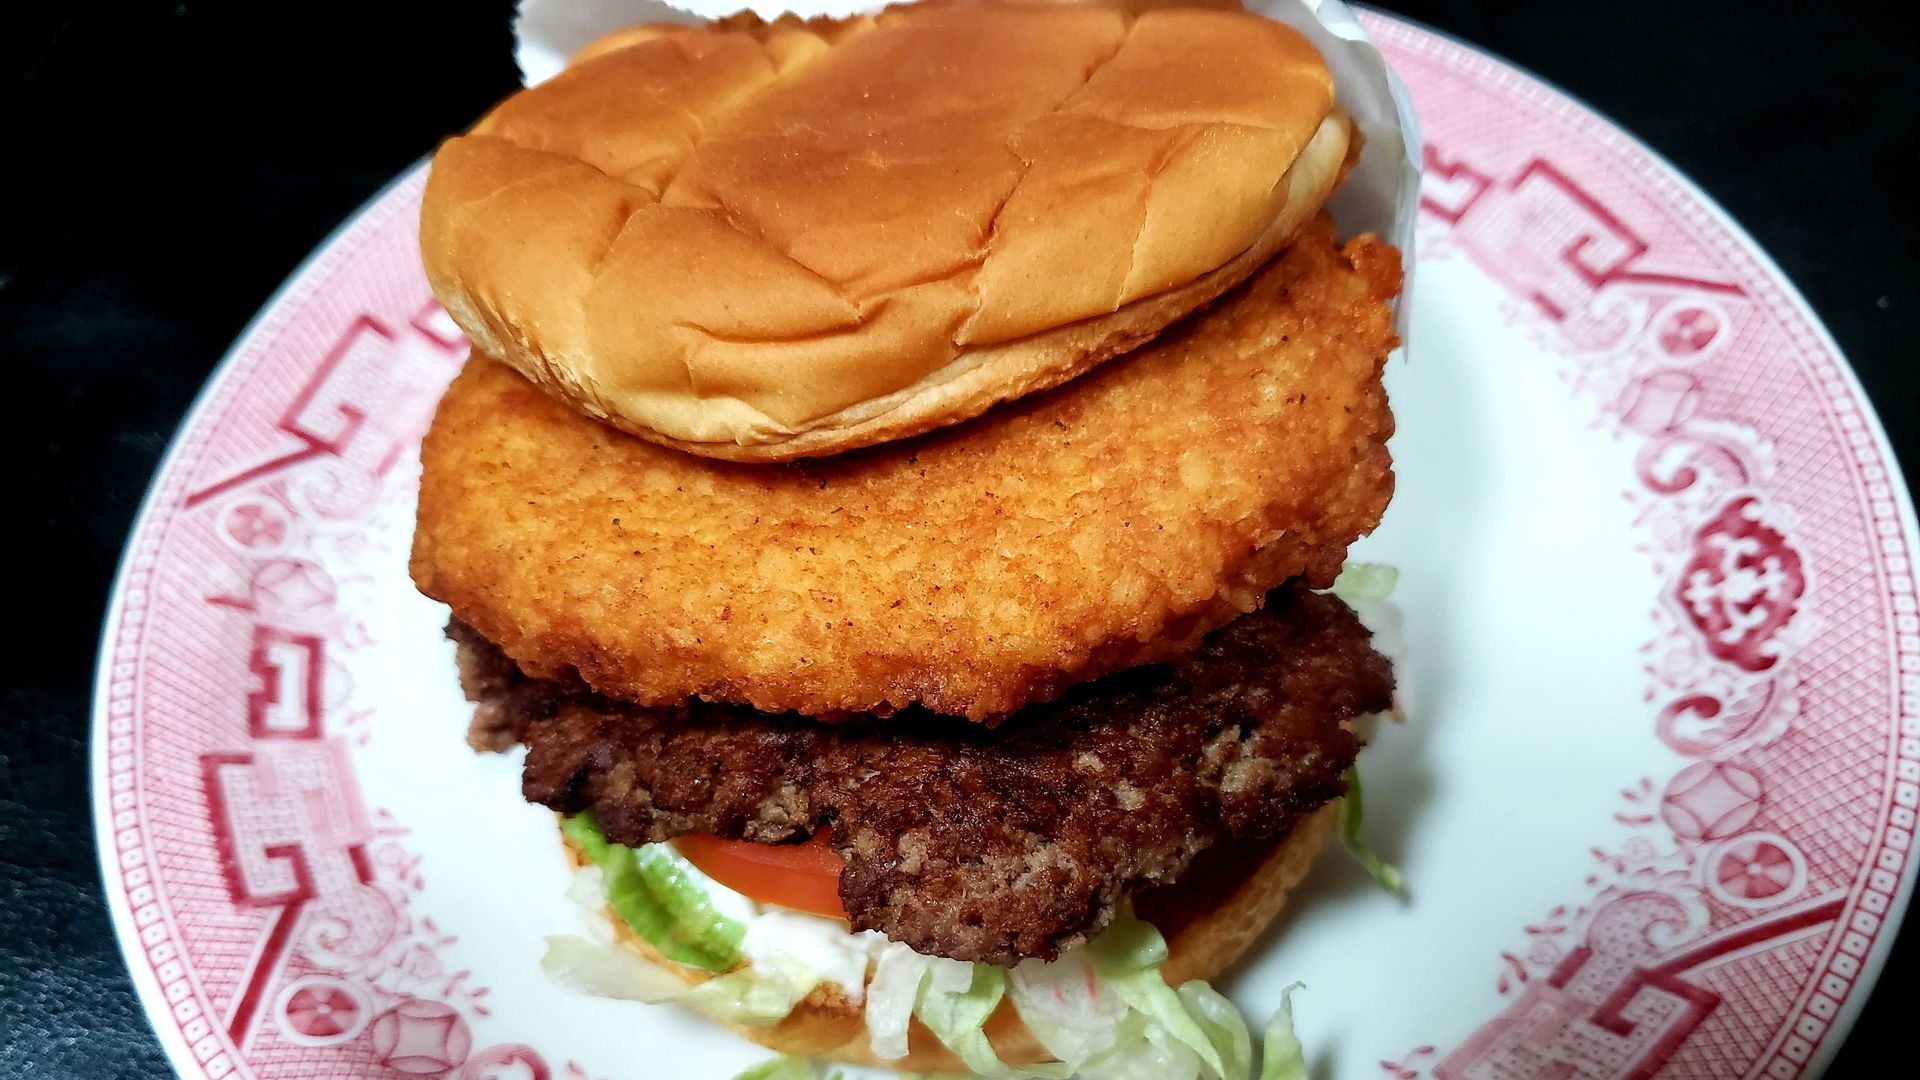 A burger with a cheese curd on top